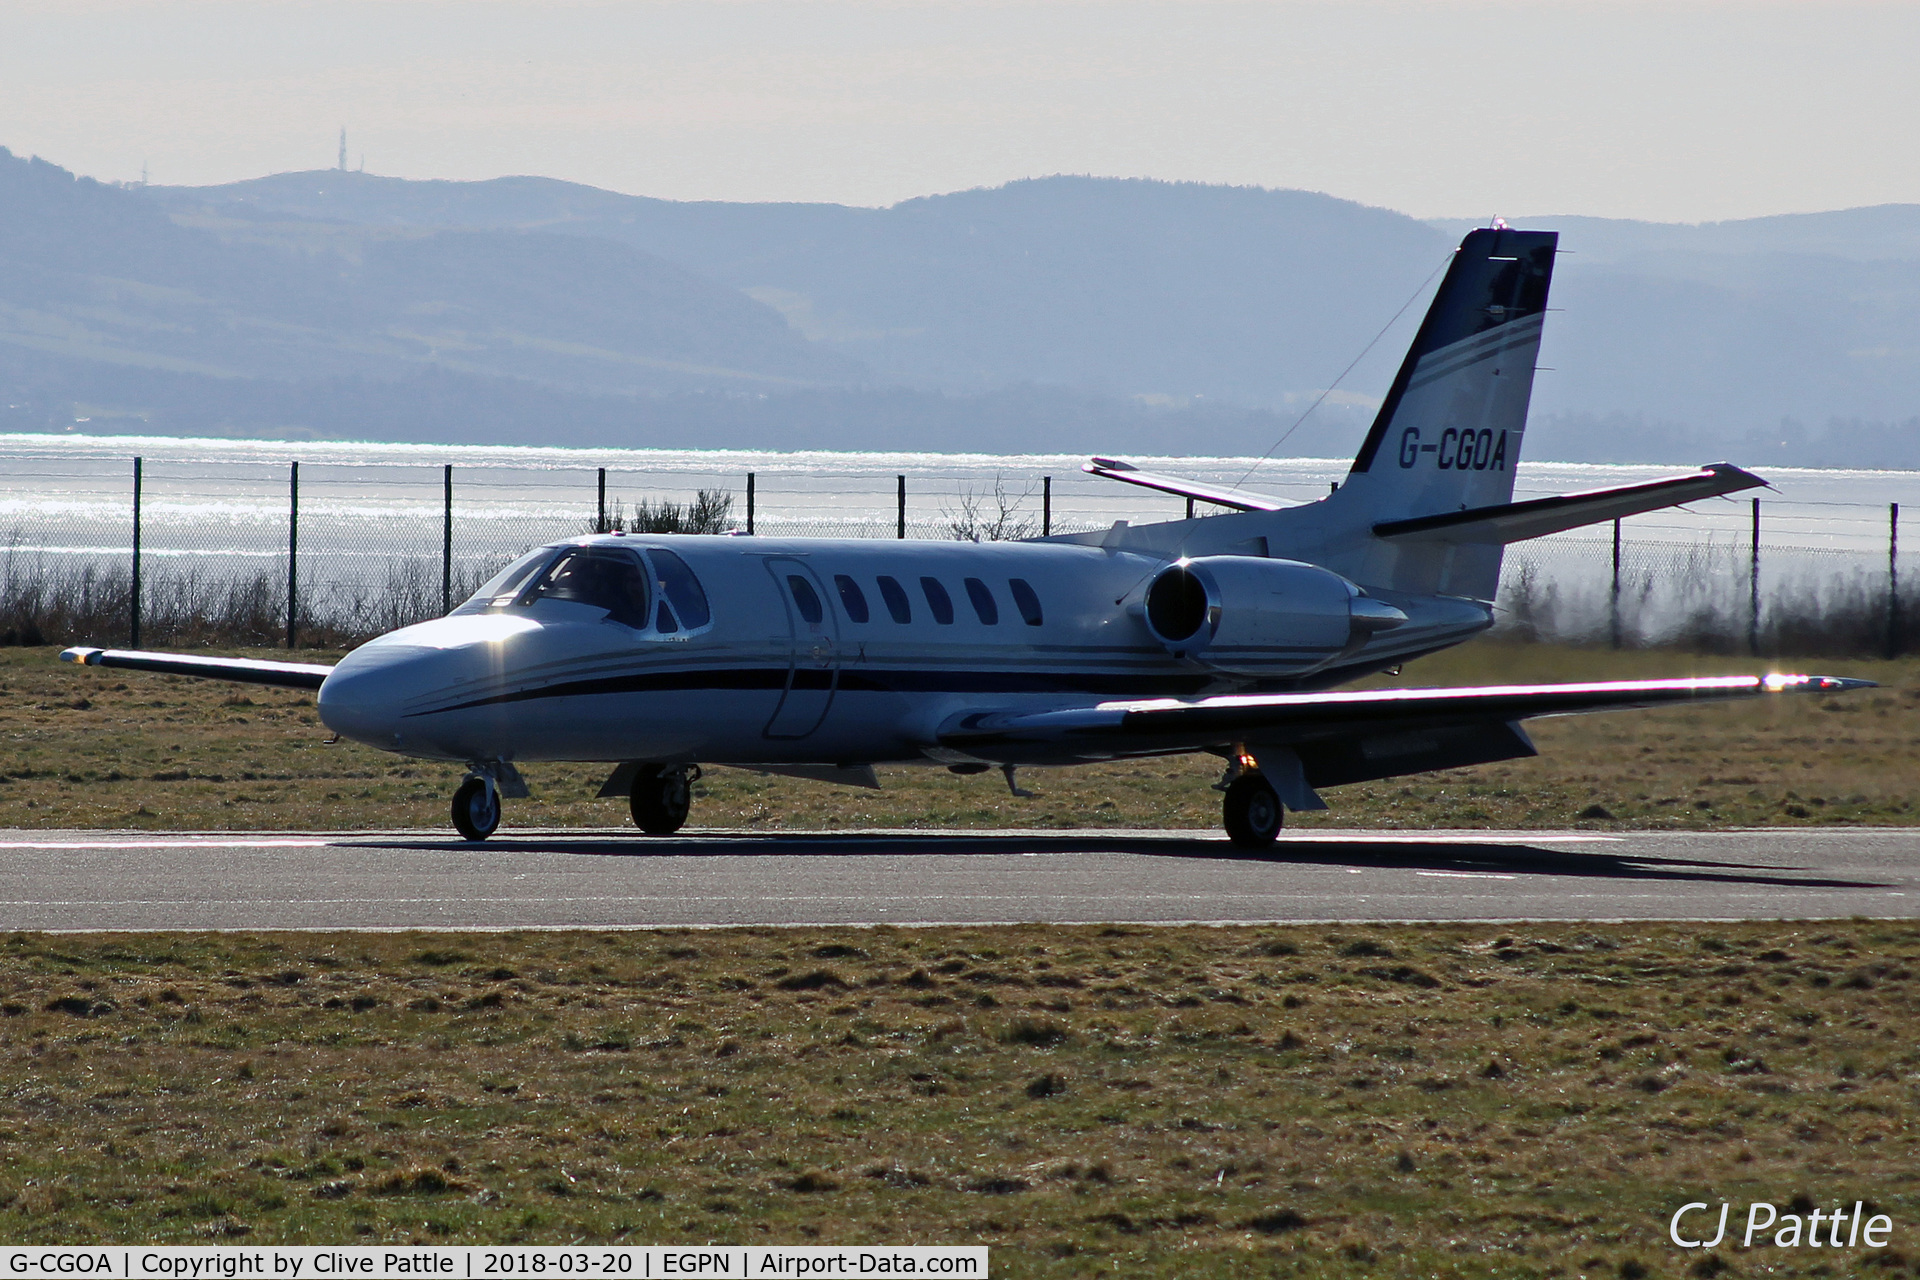 G-CGOA, 1980 Cessna 550 Citation II C/N 550-0183, Taxy to parking - Dundee